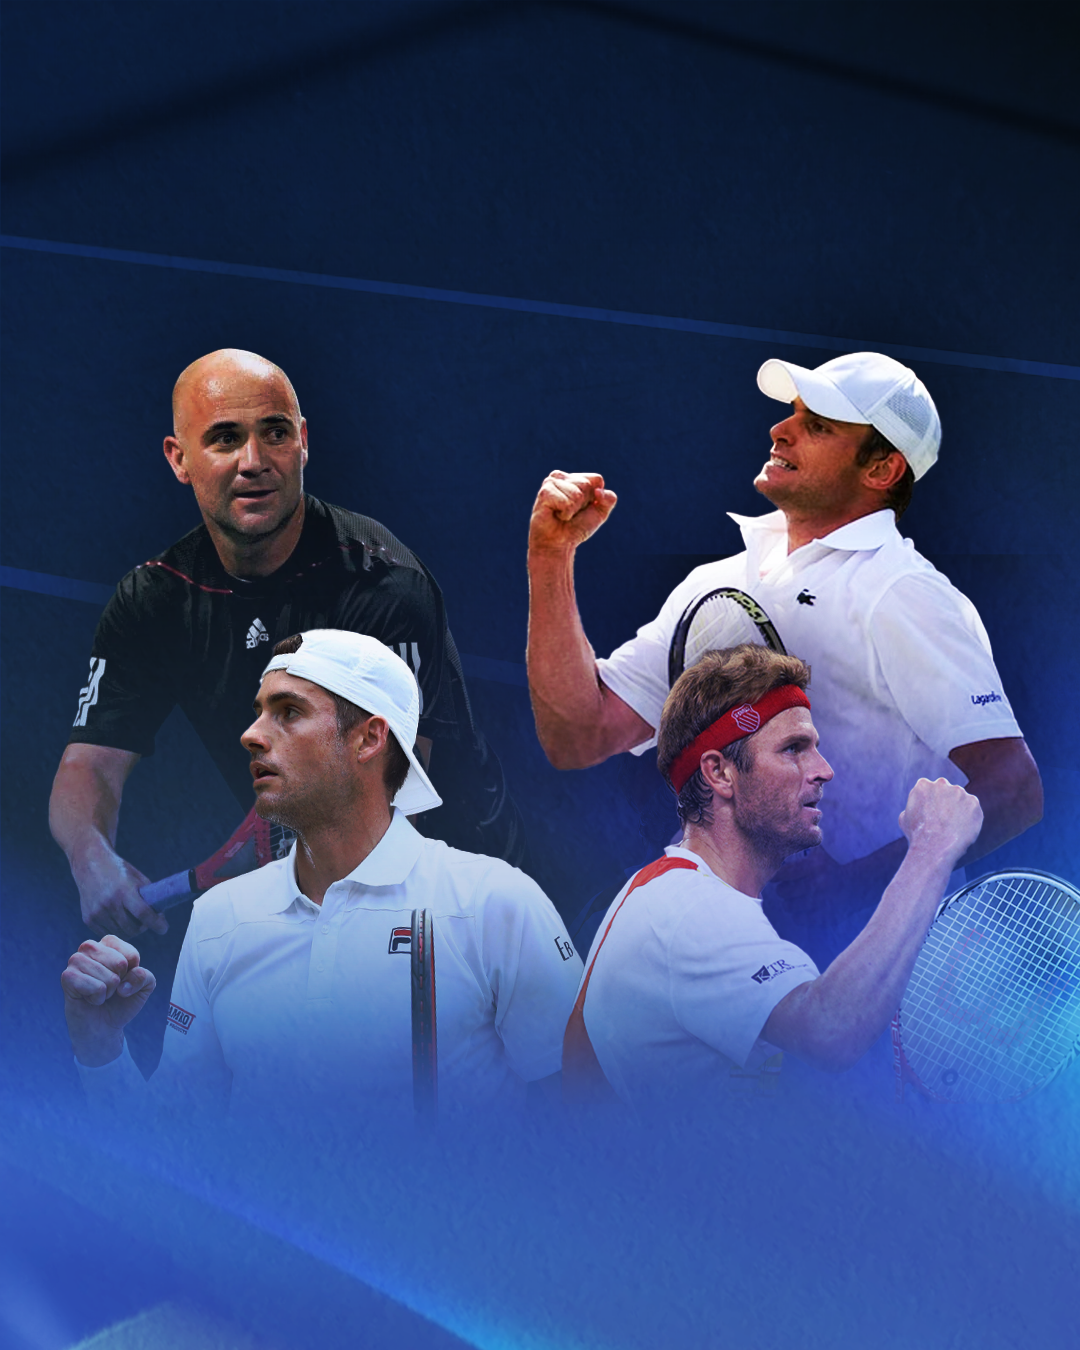 Andre Agassi, John Isner, Mardy Fish and Andy Roddick